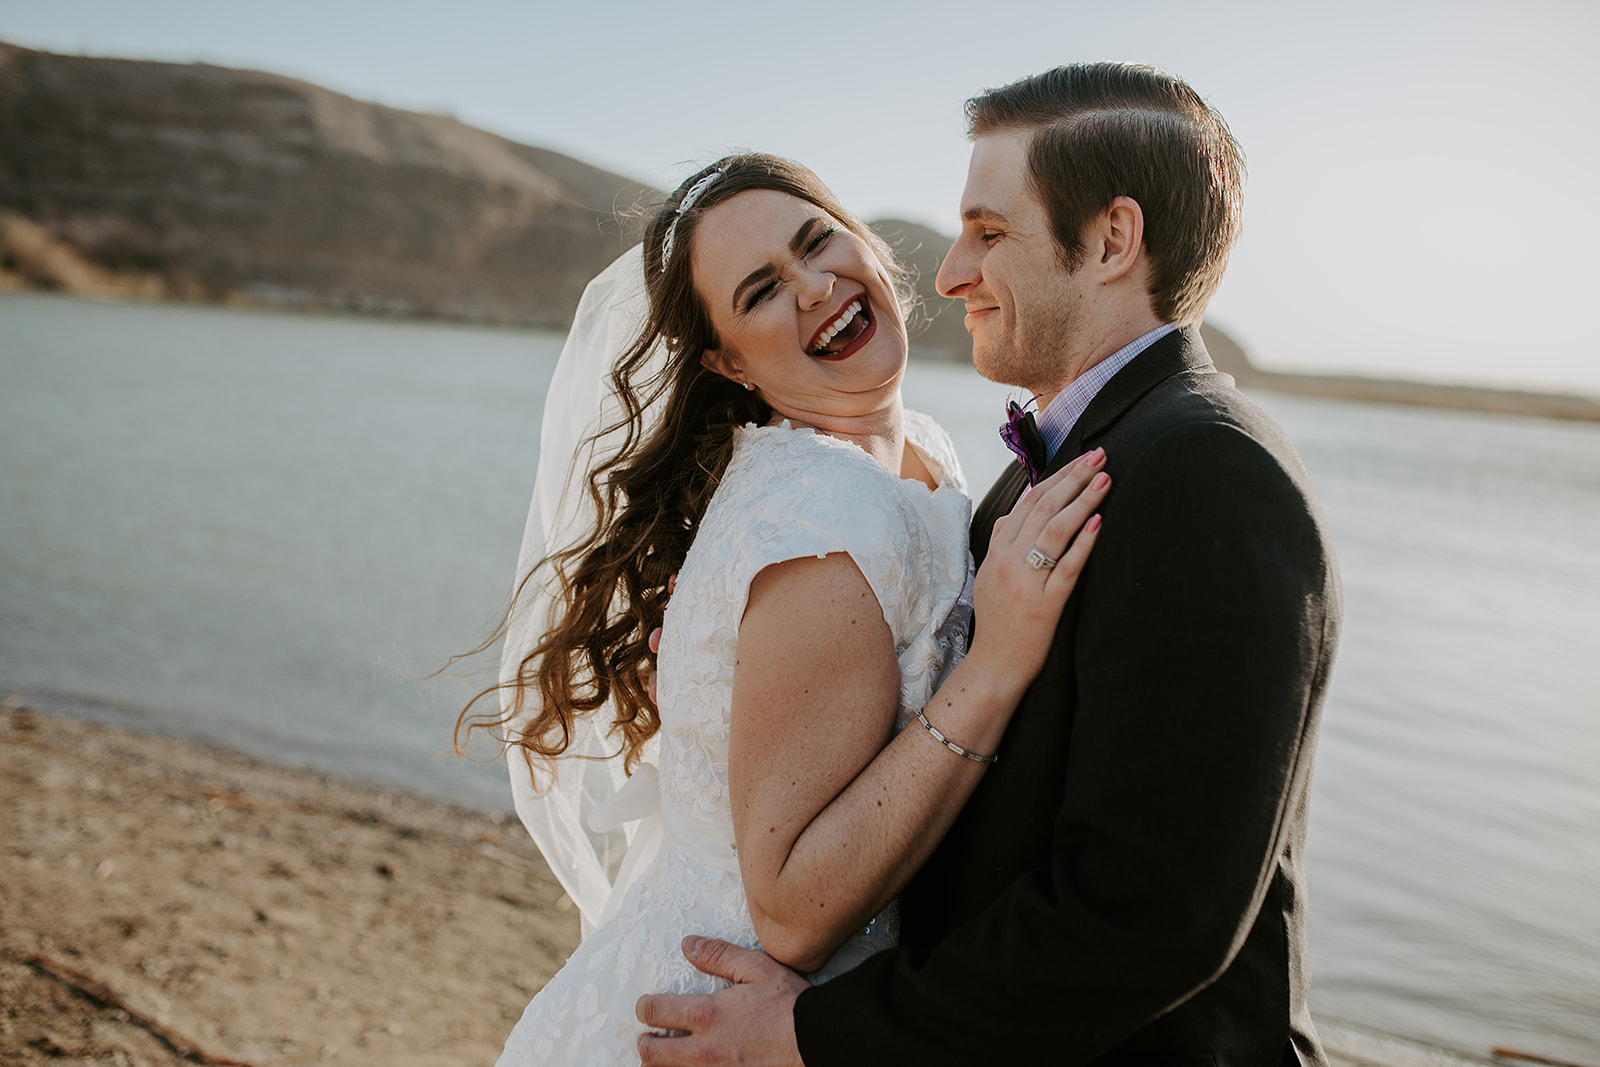 Candid laughing wedding photo of couple